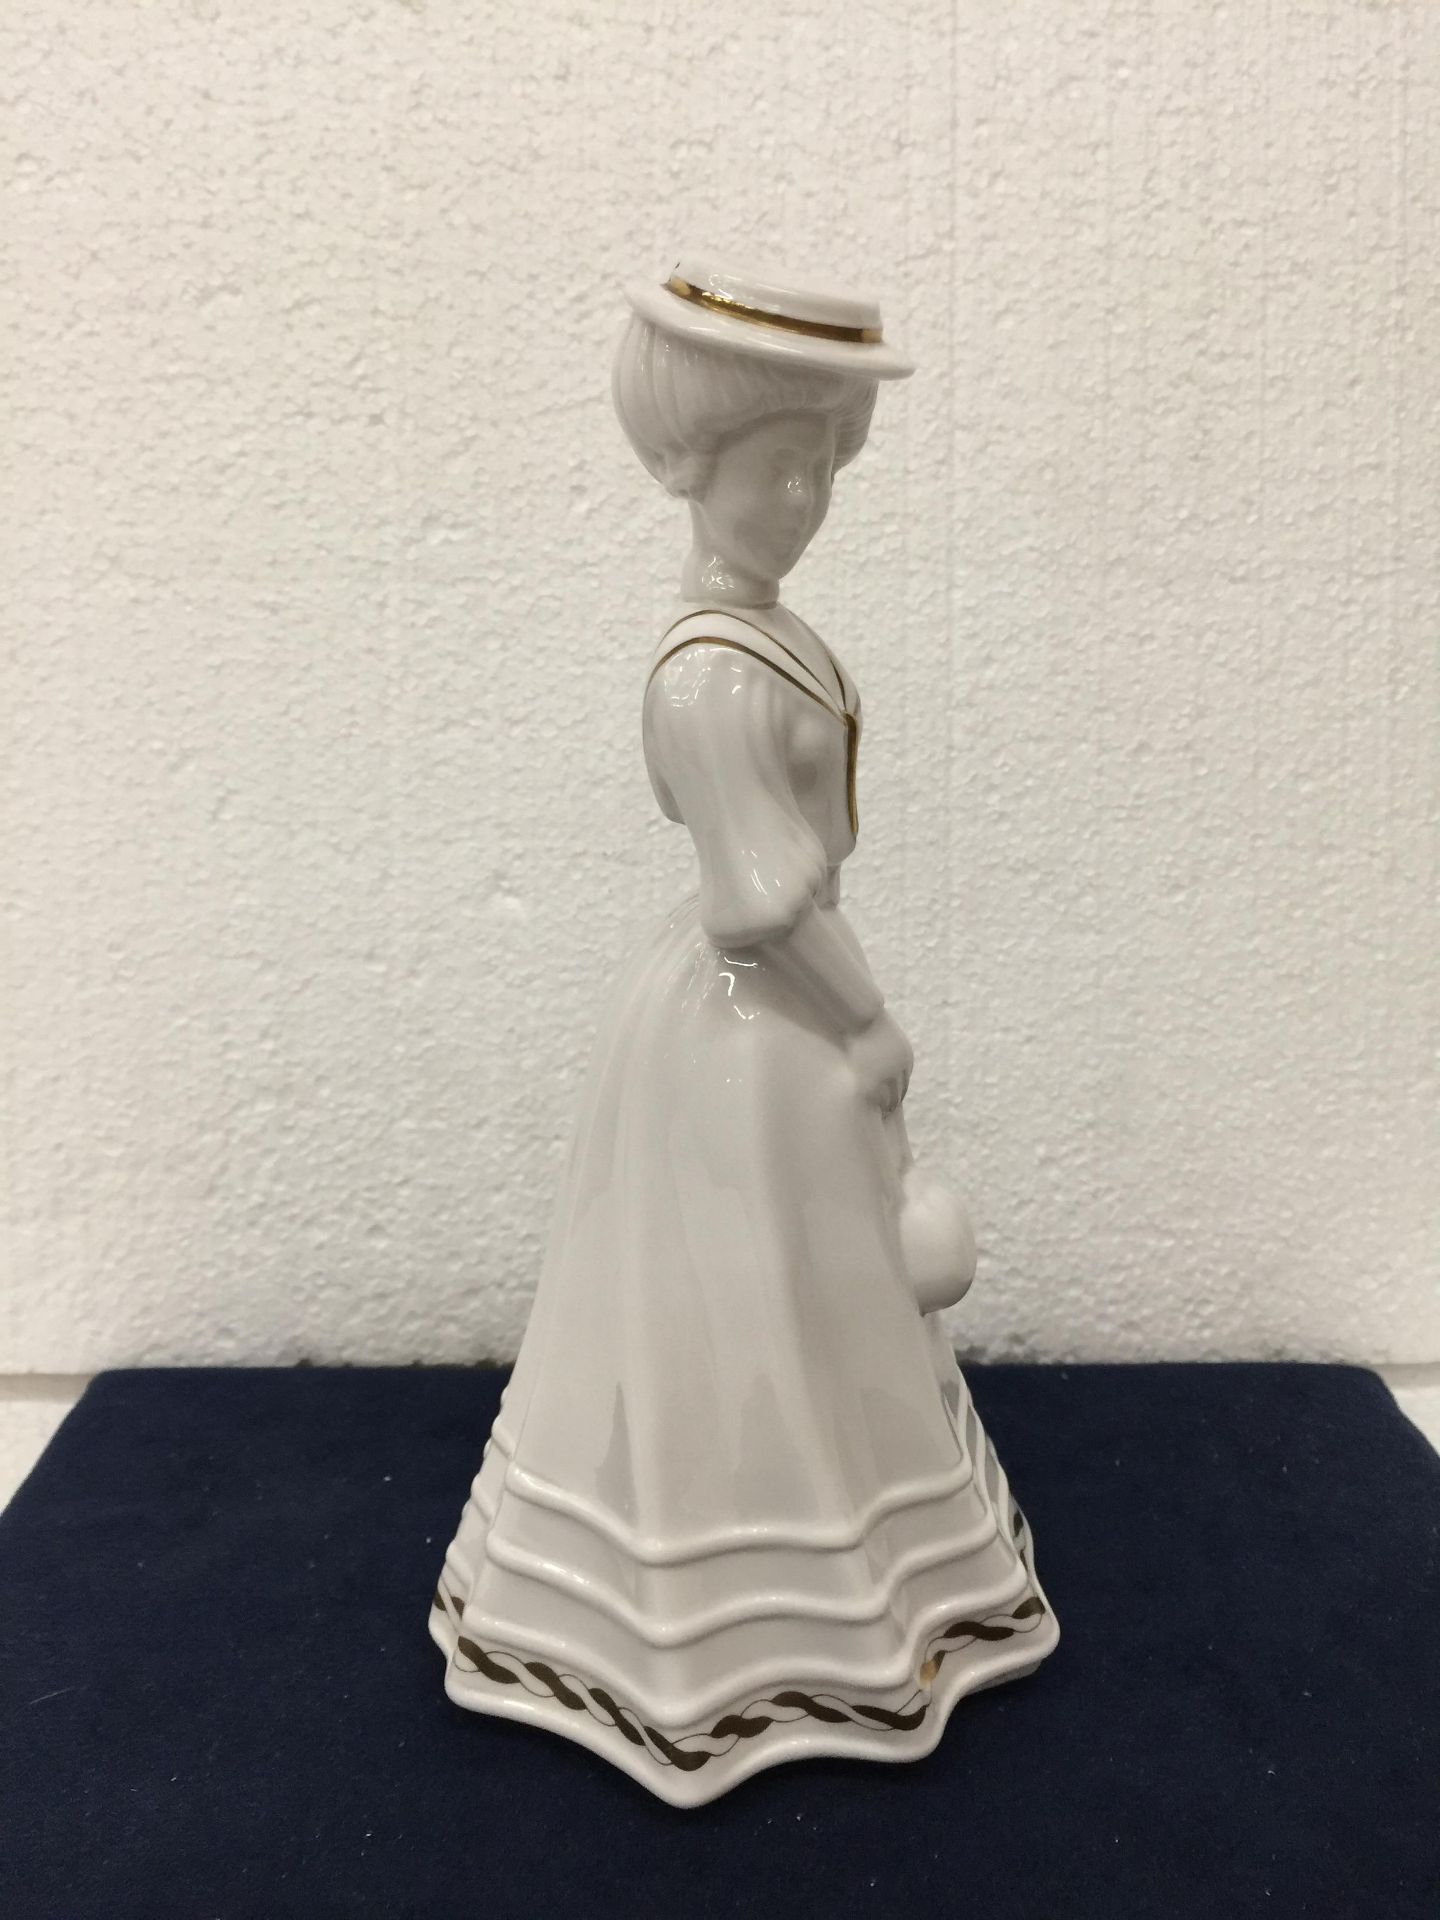 A SPODE FIGURINE "LILY" BY PAULINE SHONE IN GLOSS - 24CM (H) - Image 3 of 7